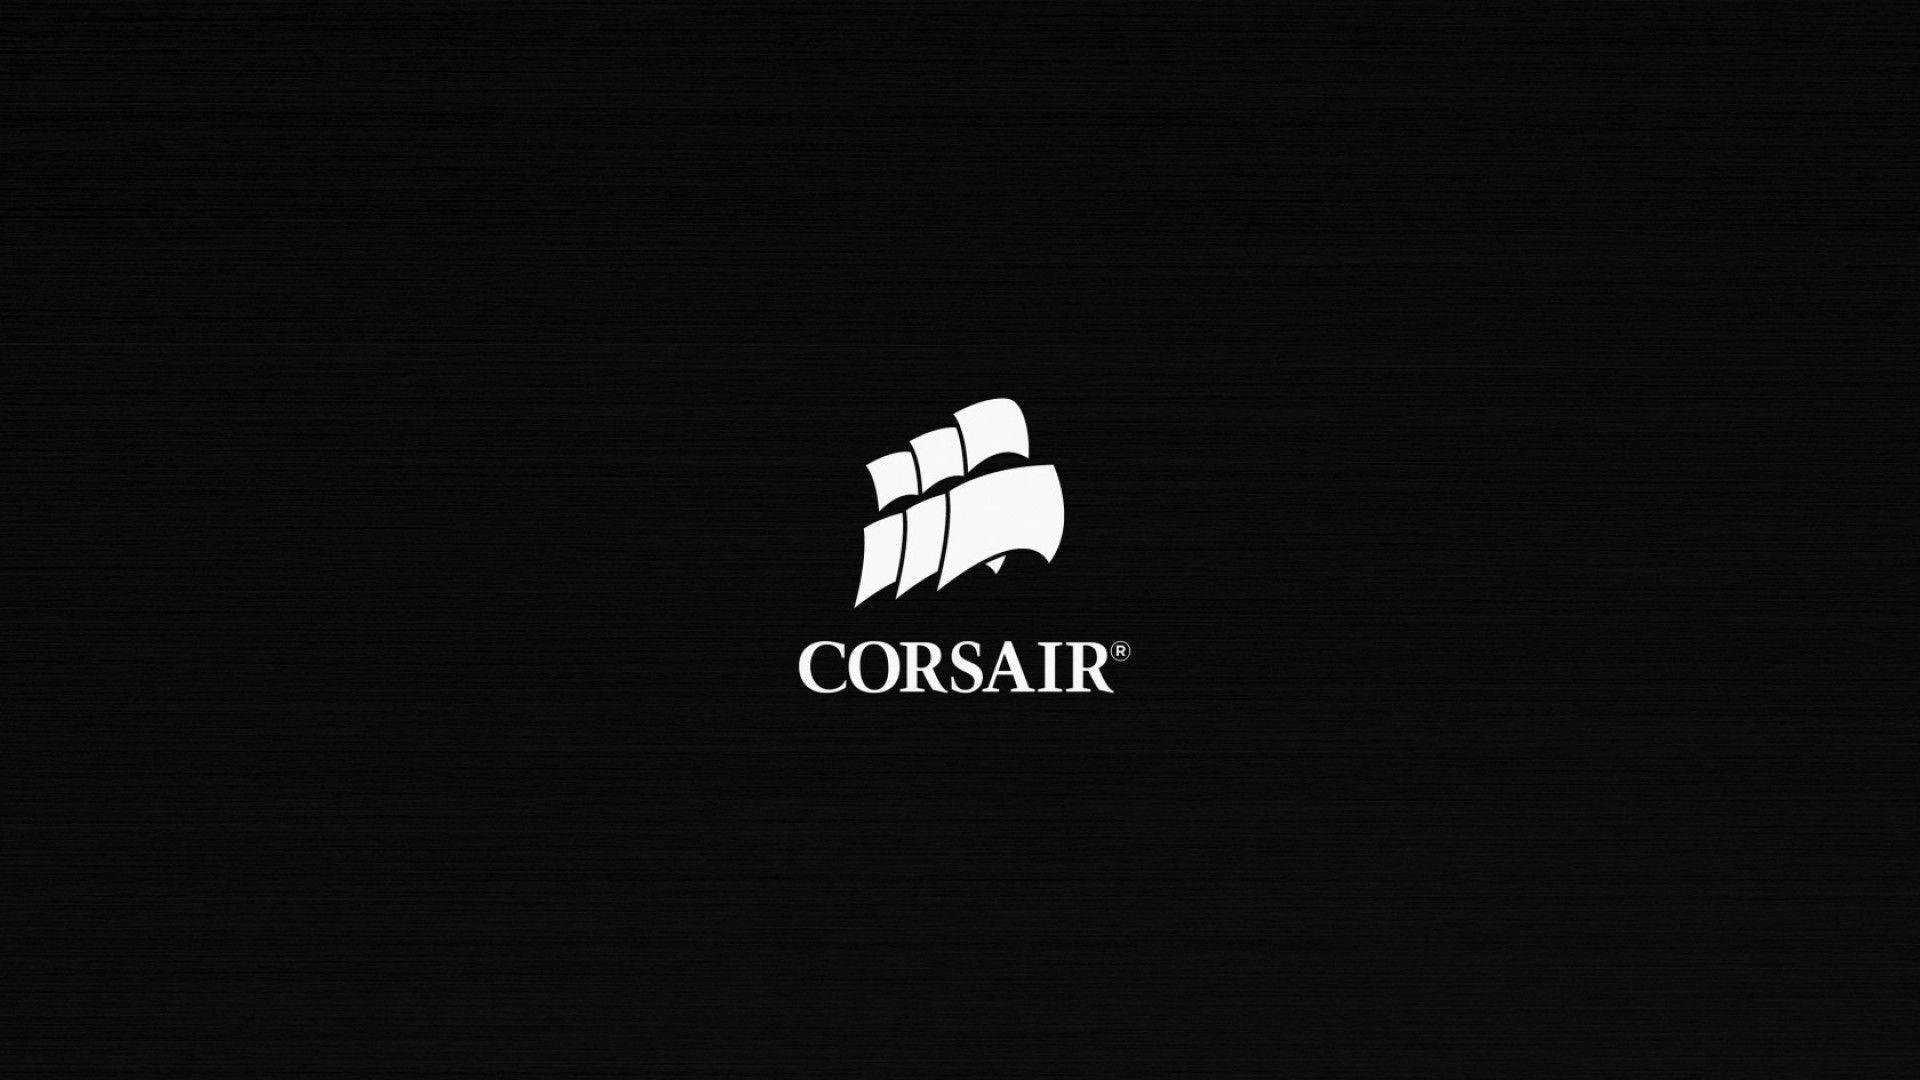 Corsair - Gaming Accessories for a More Intense Experience Wallpaper